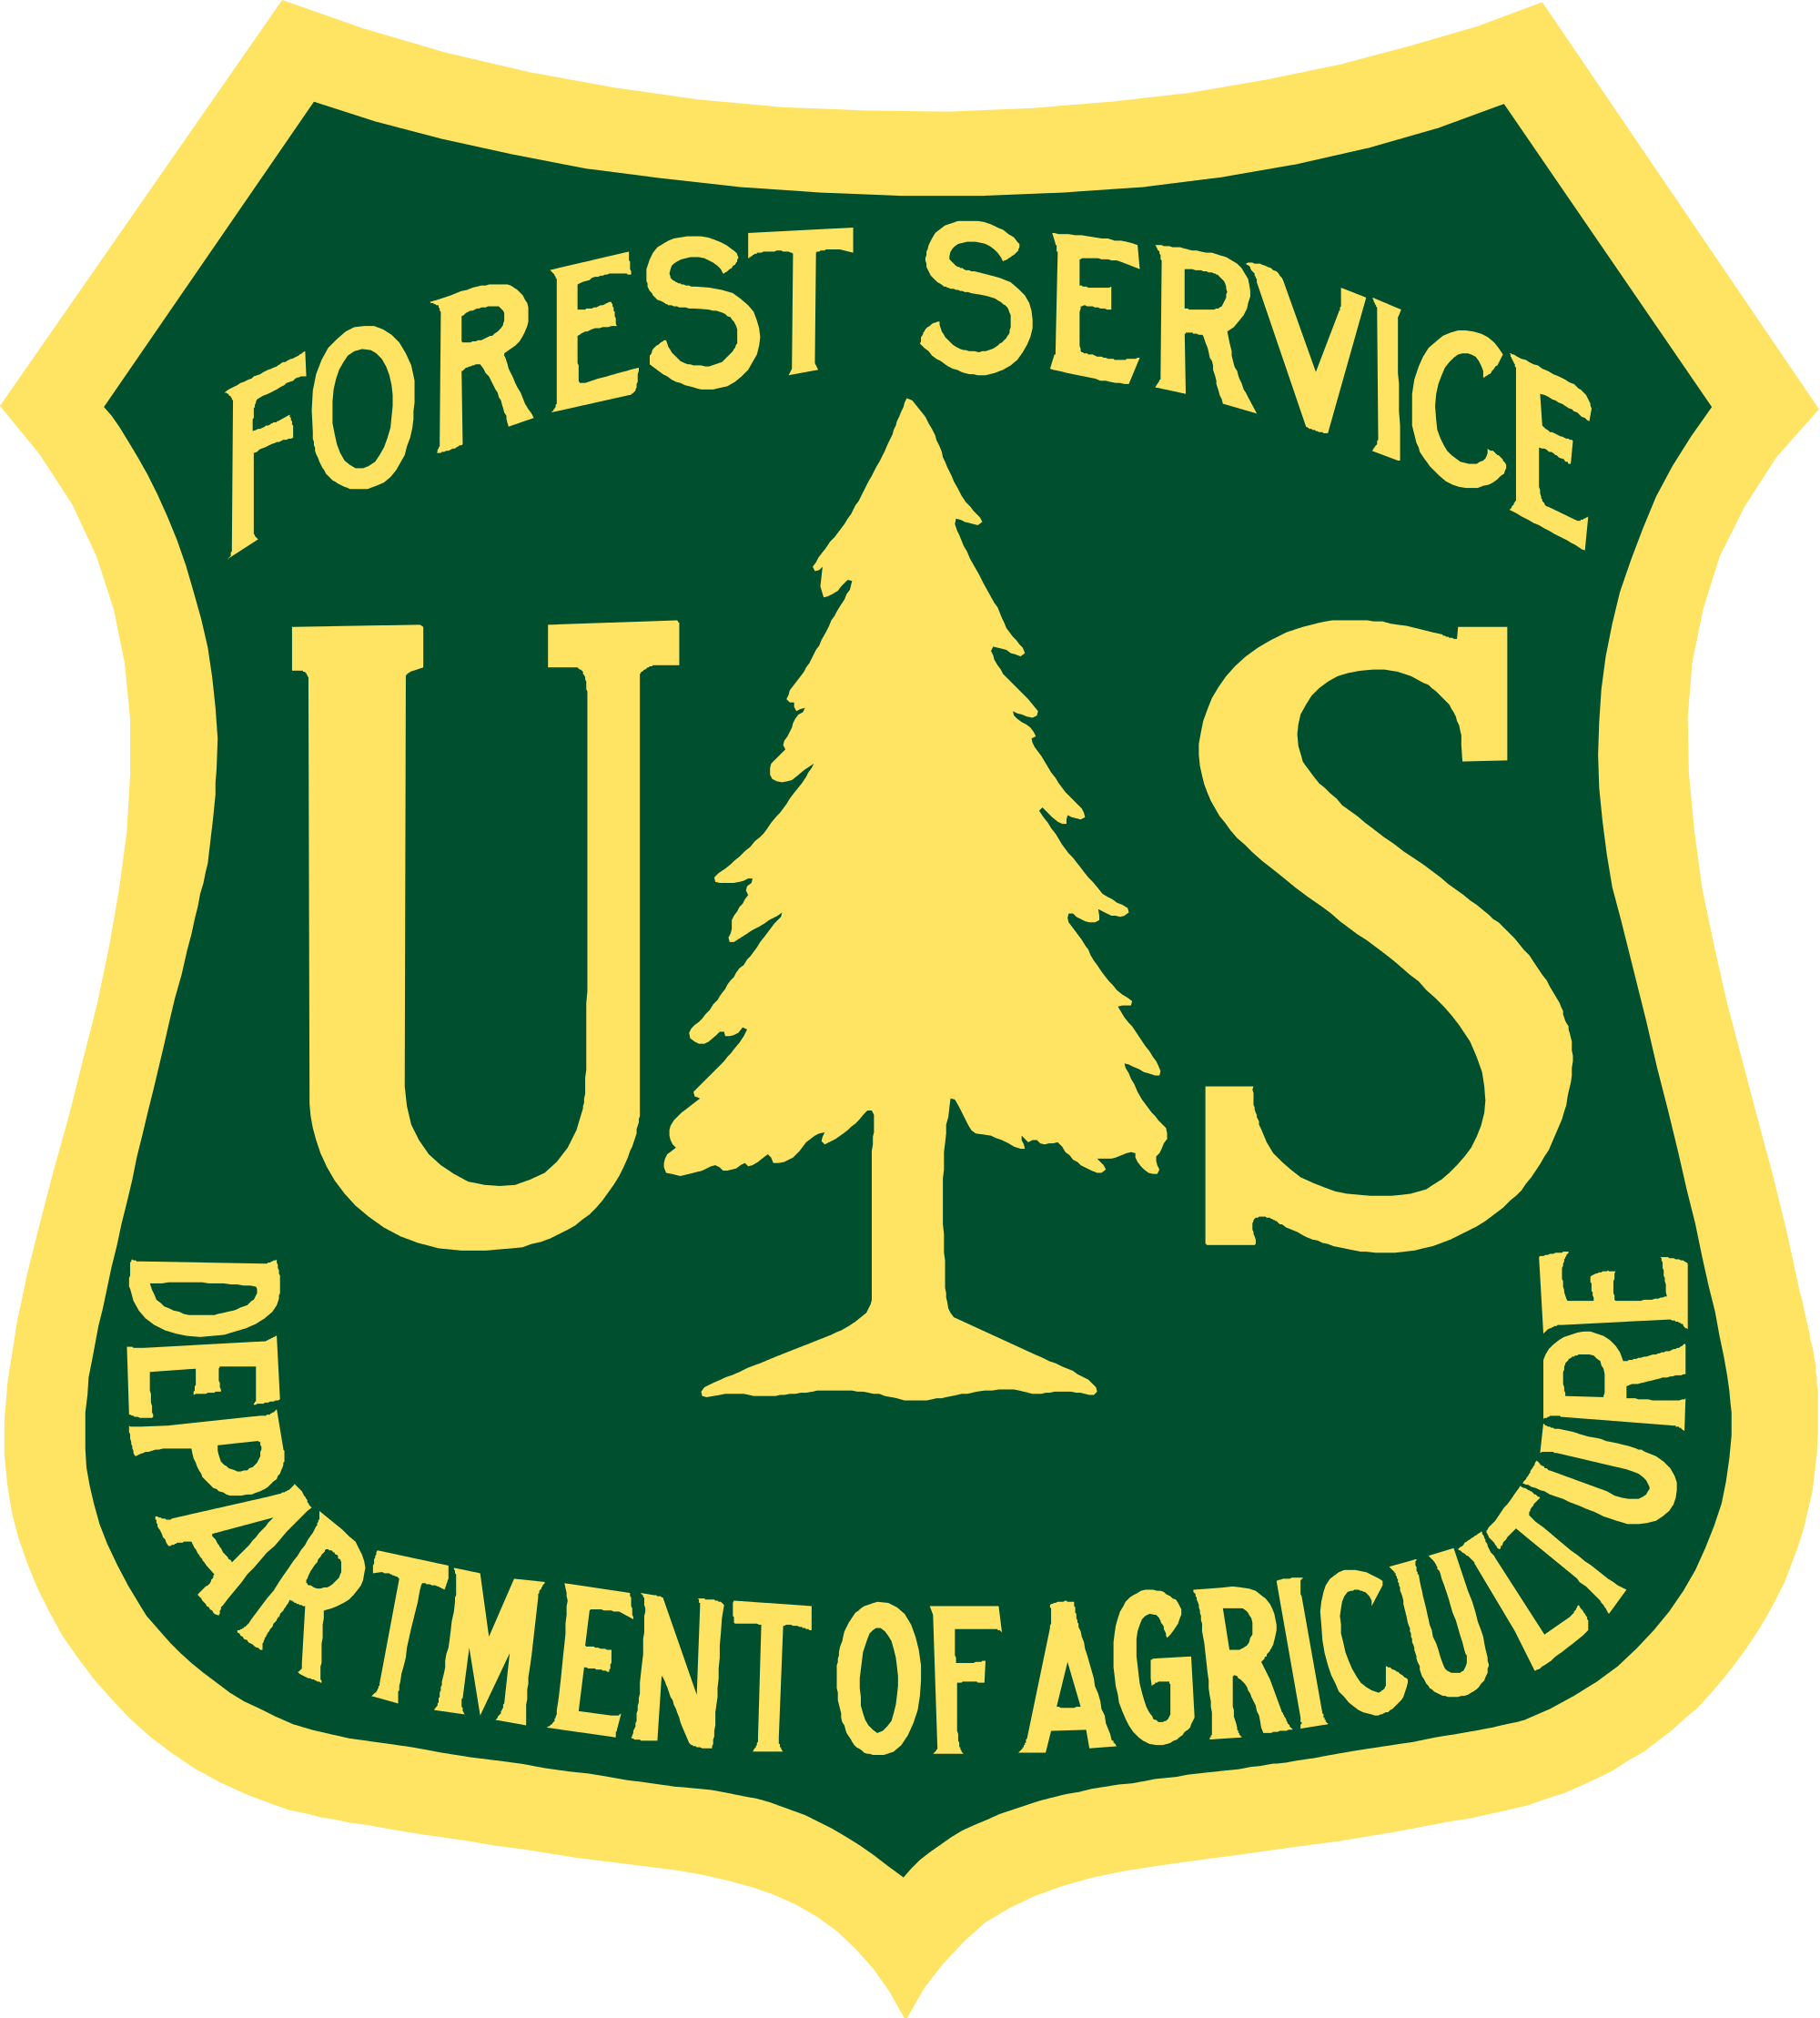 ForestServiceLogoOfficial